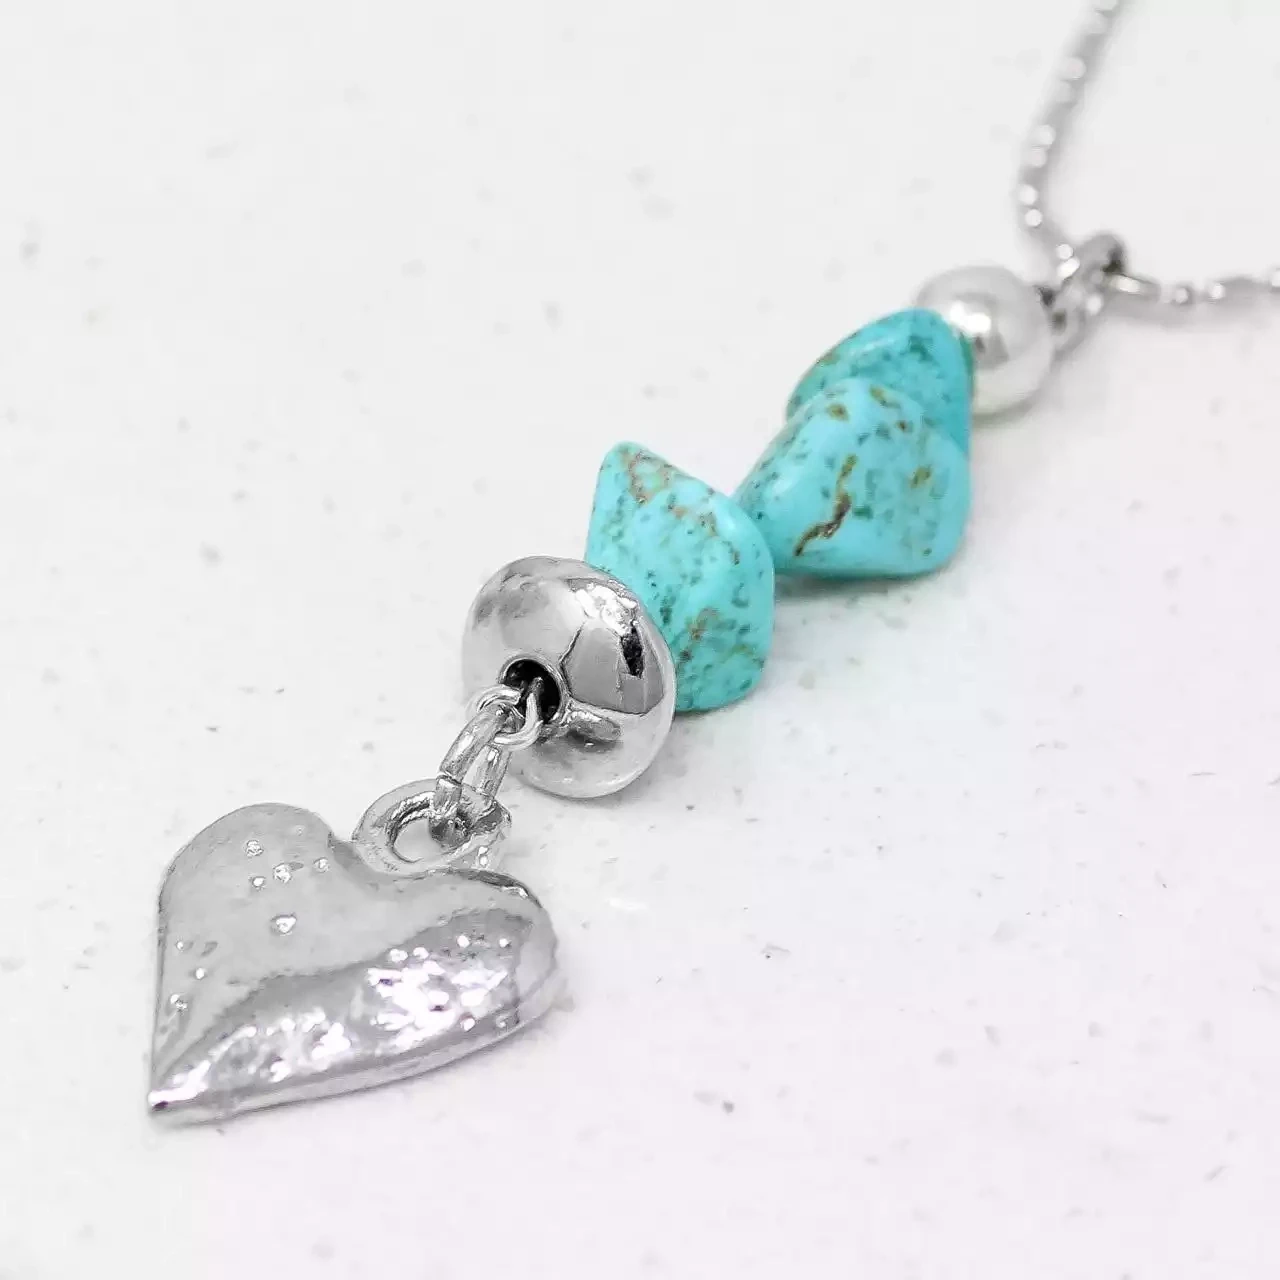 Pewter Heart and Turquoise Pendant by Metal Planet